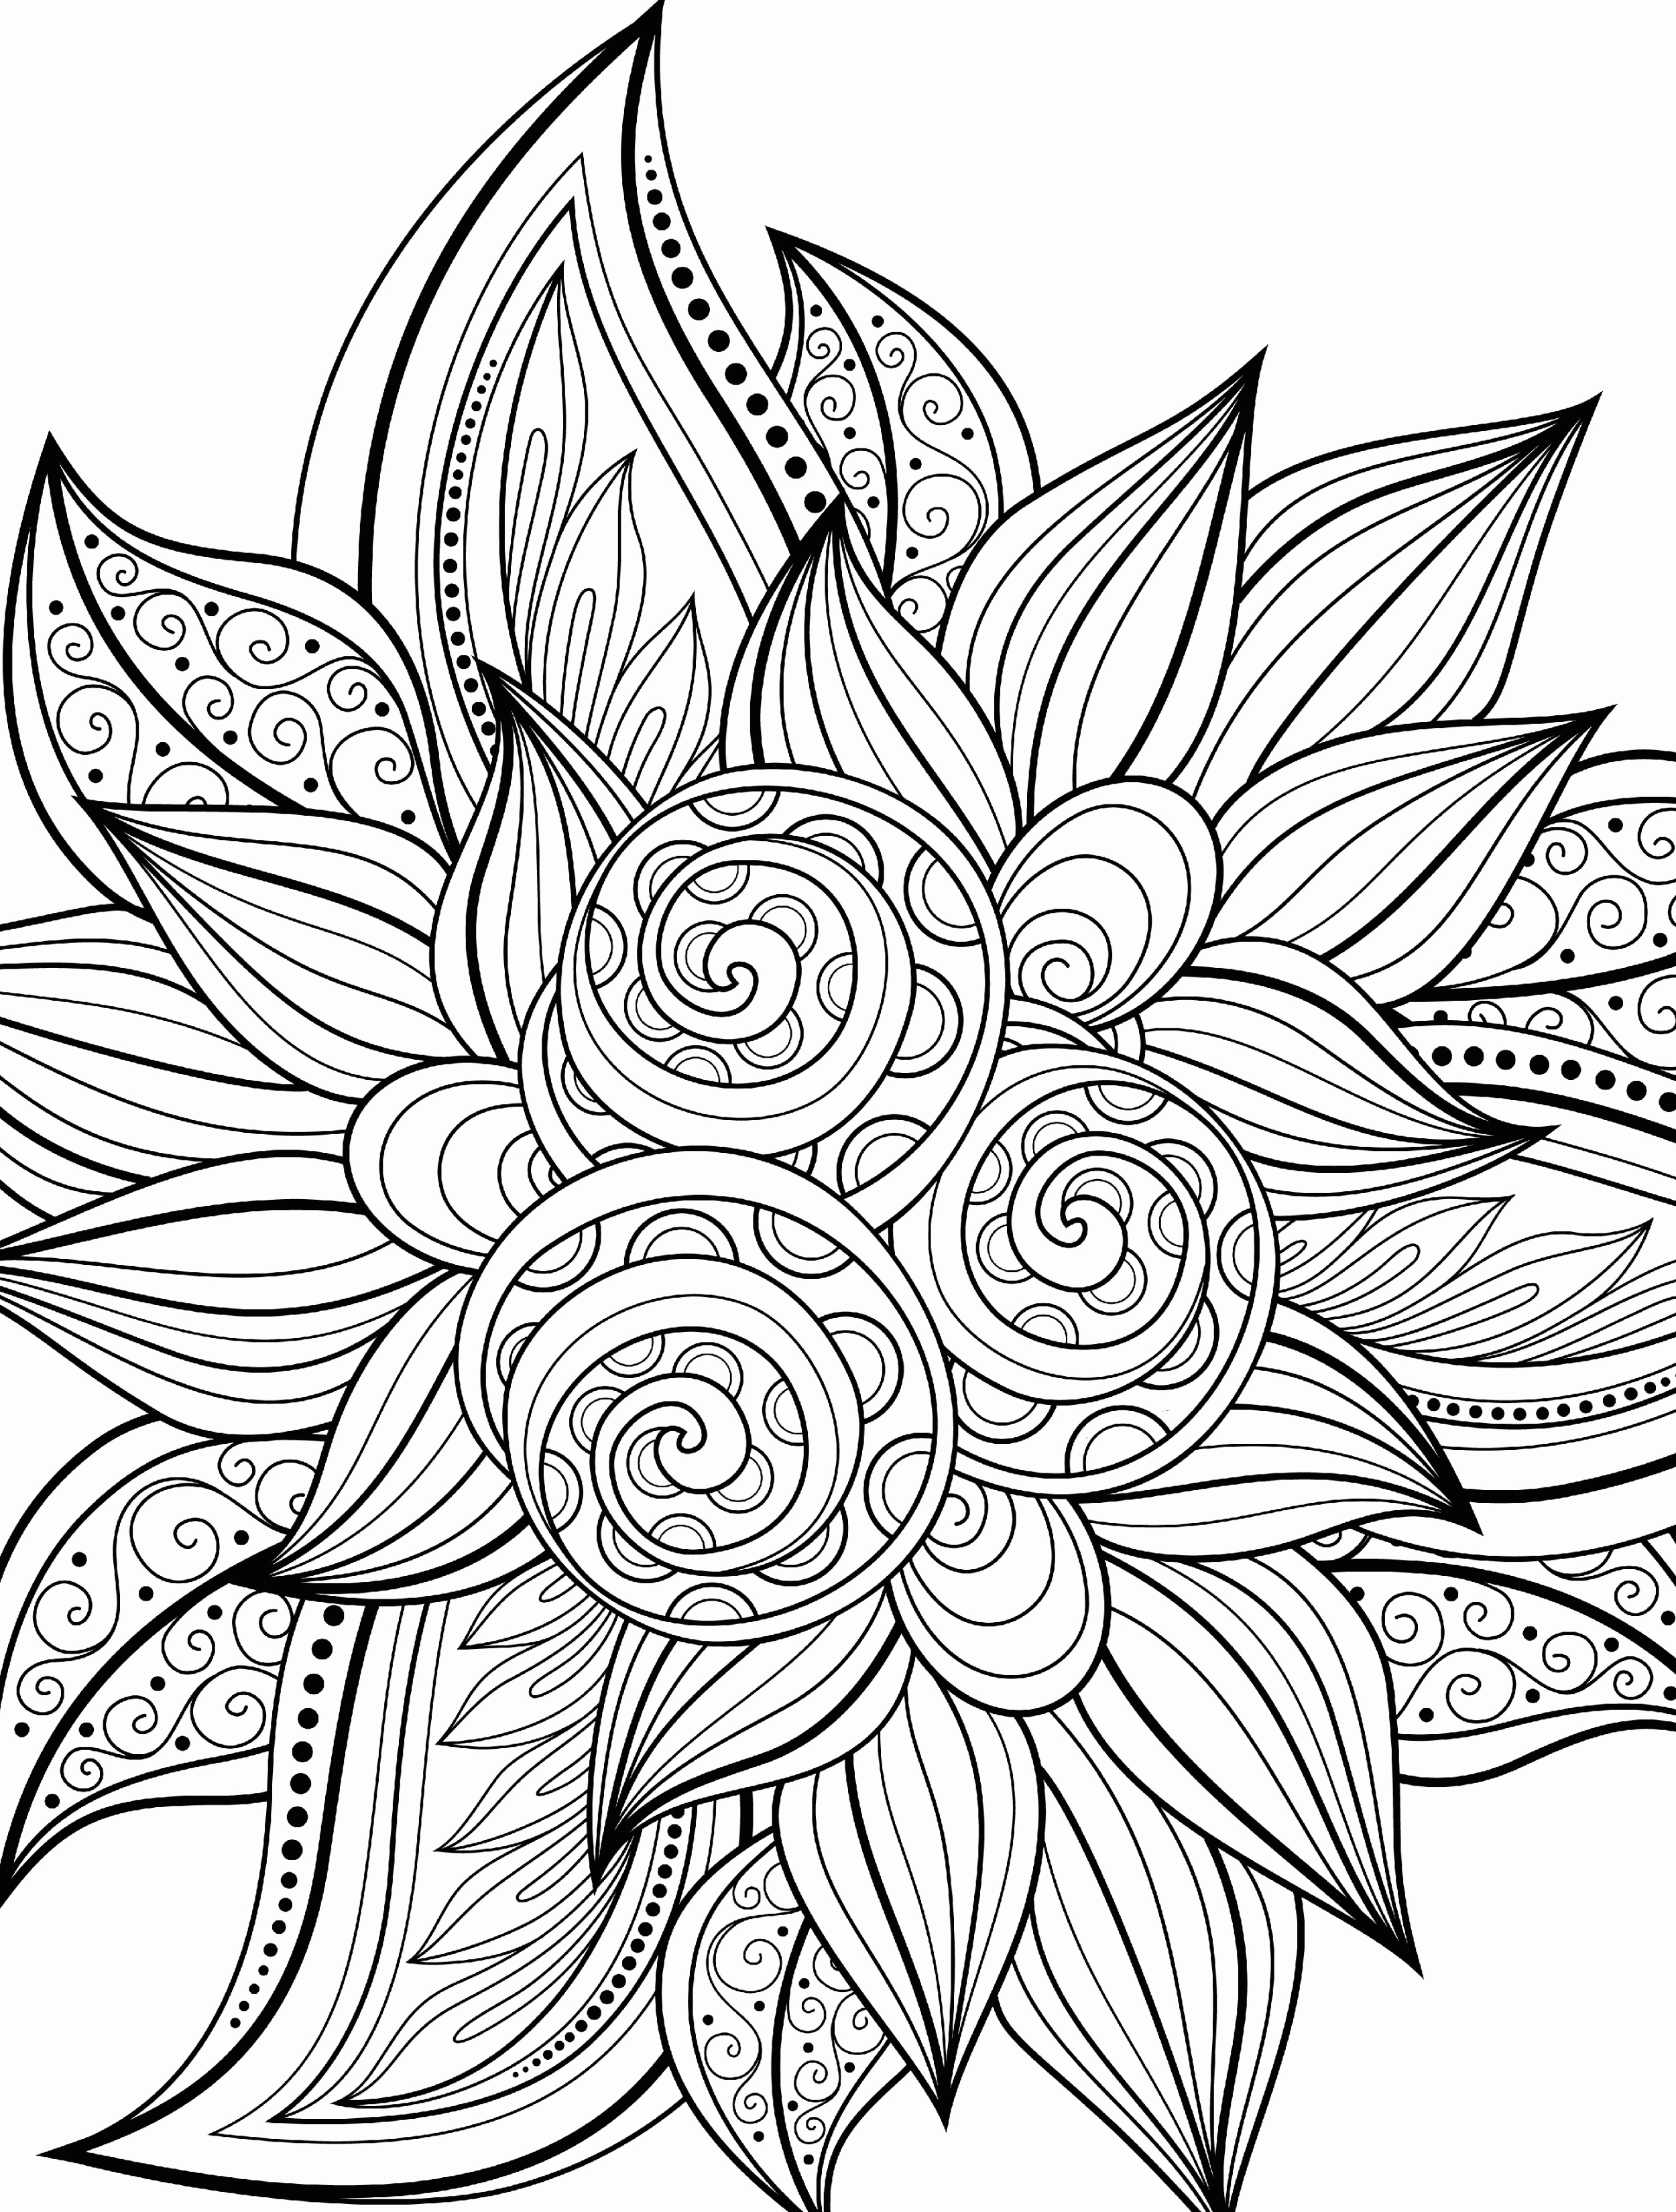 Free Printable Coloring Pages For Adults Only Image 48 Art ...